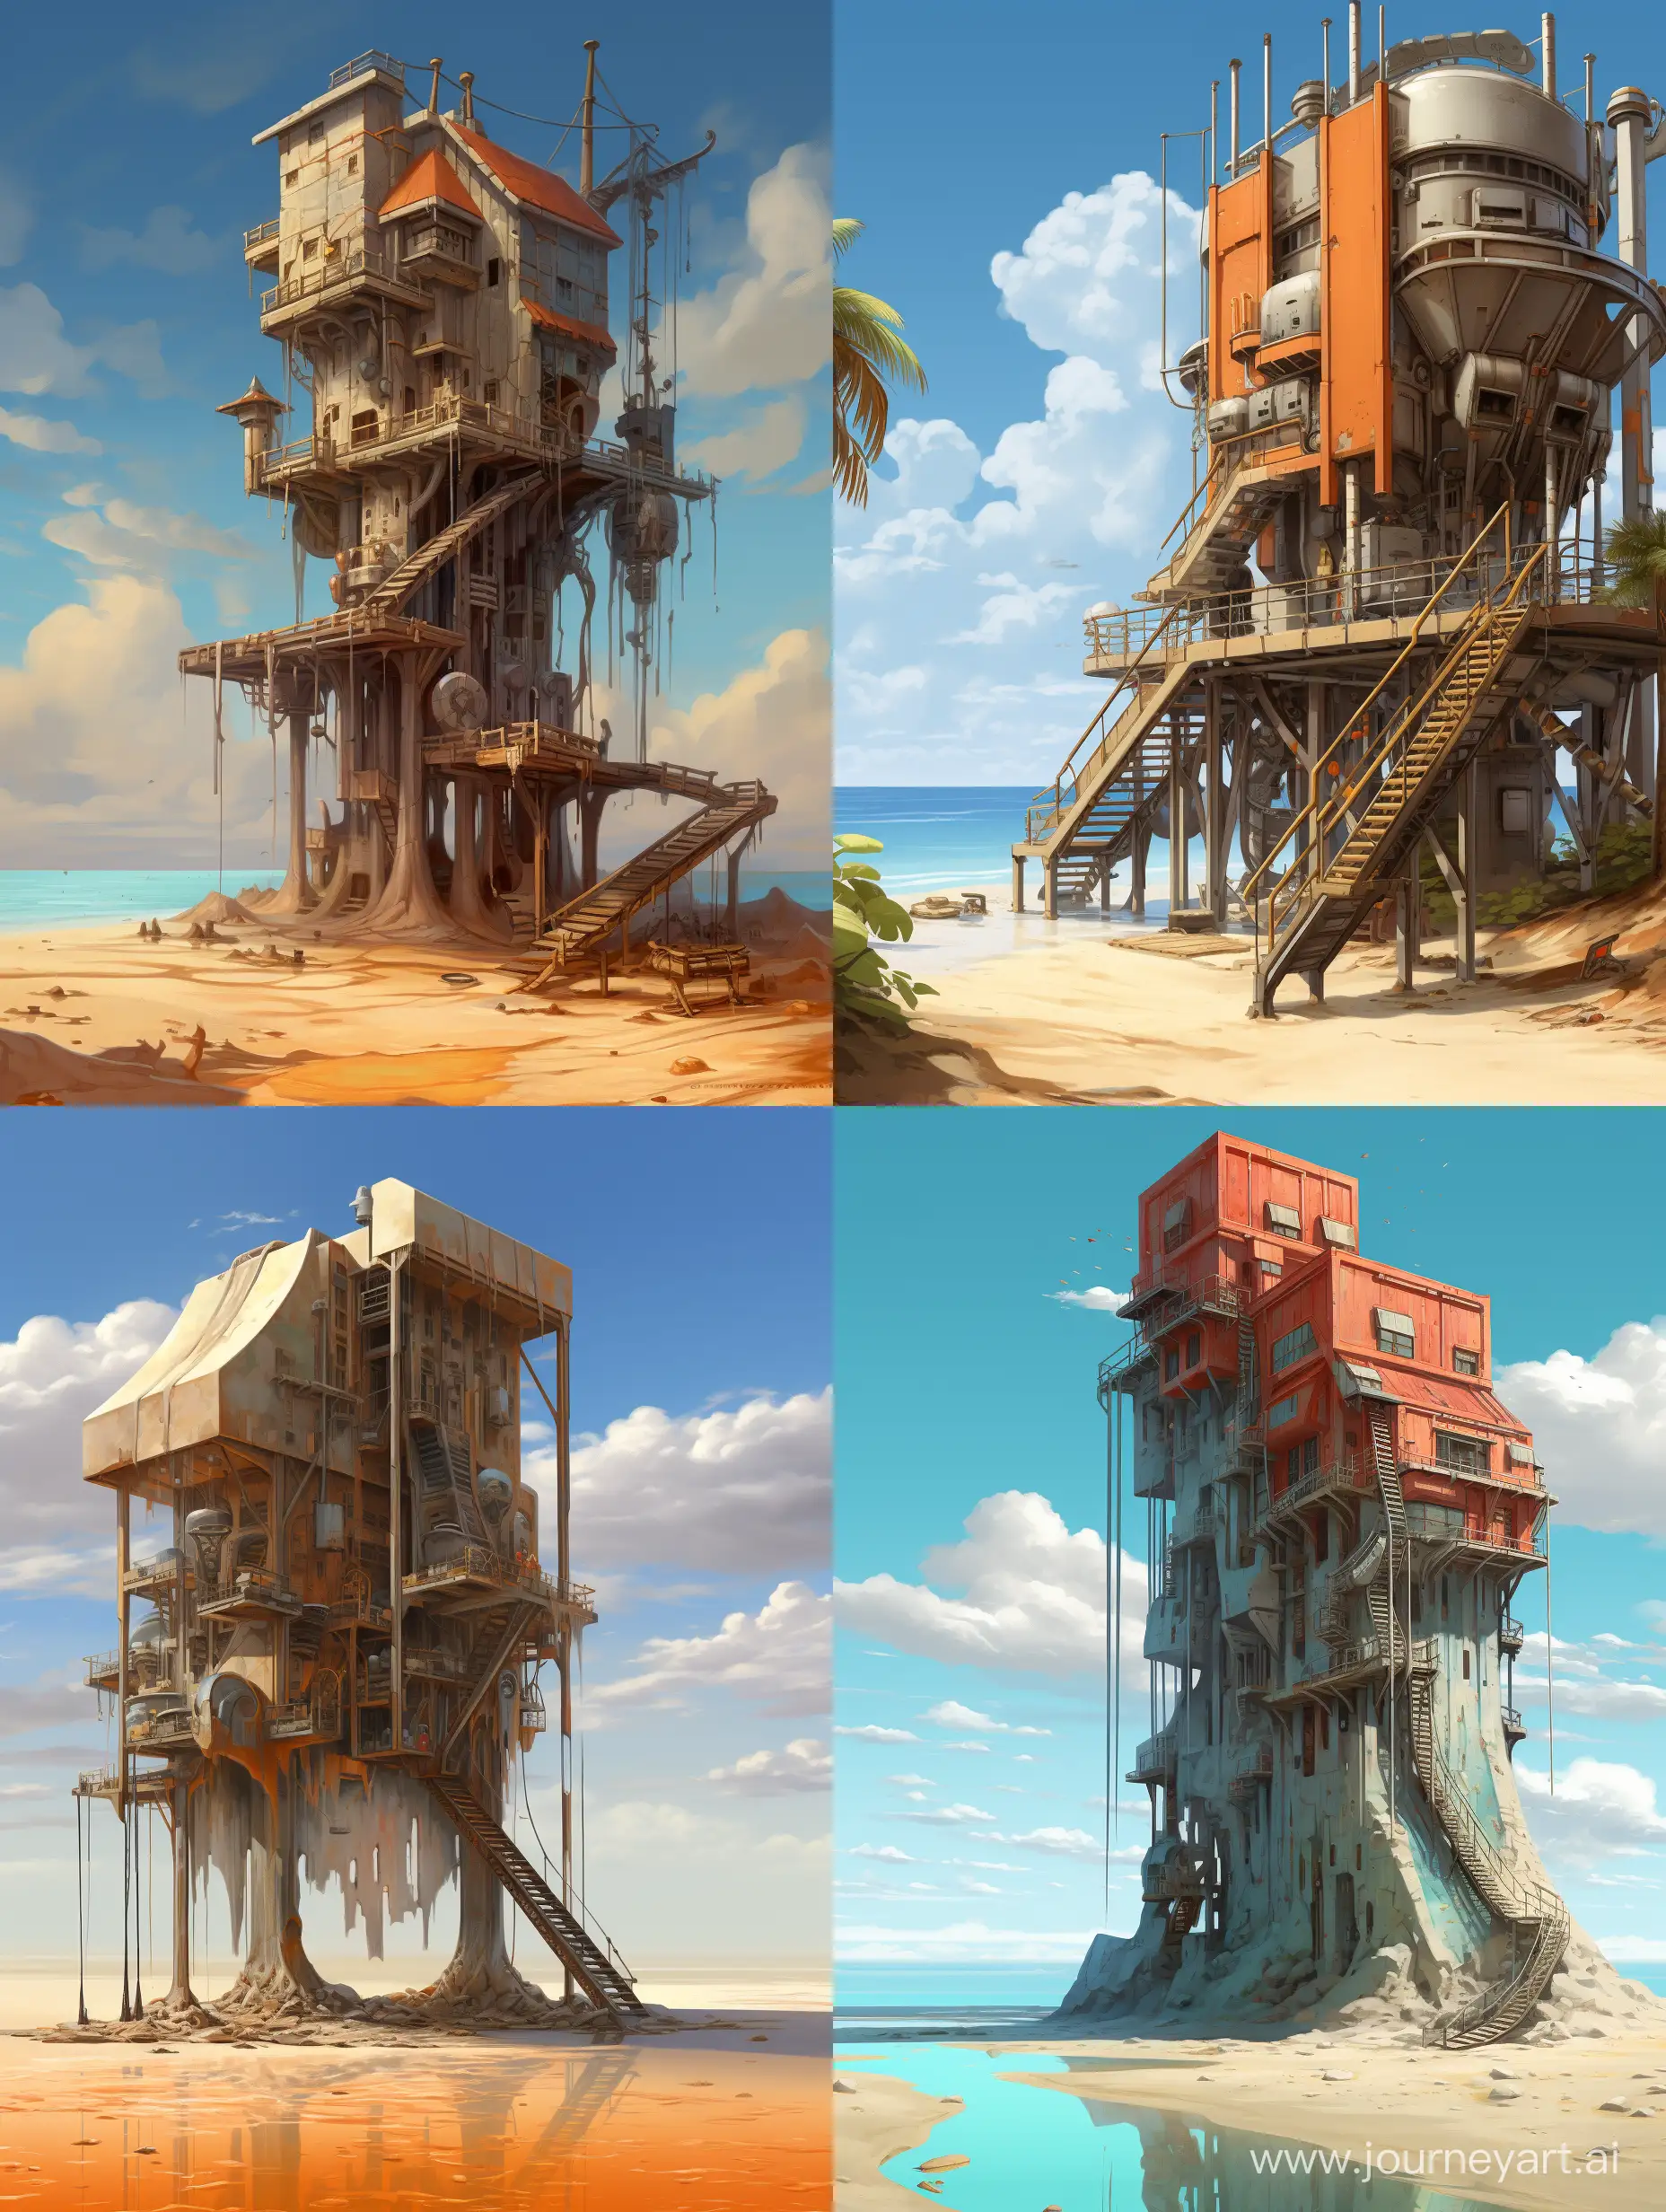 Bucket elevator in future and see buckets and working on beach